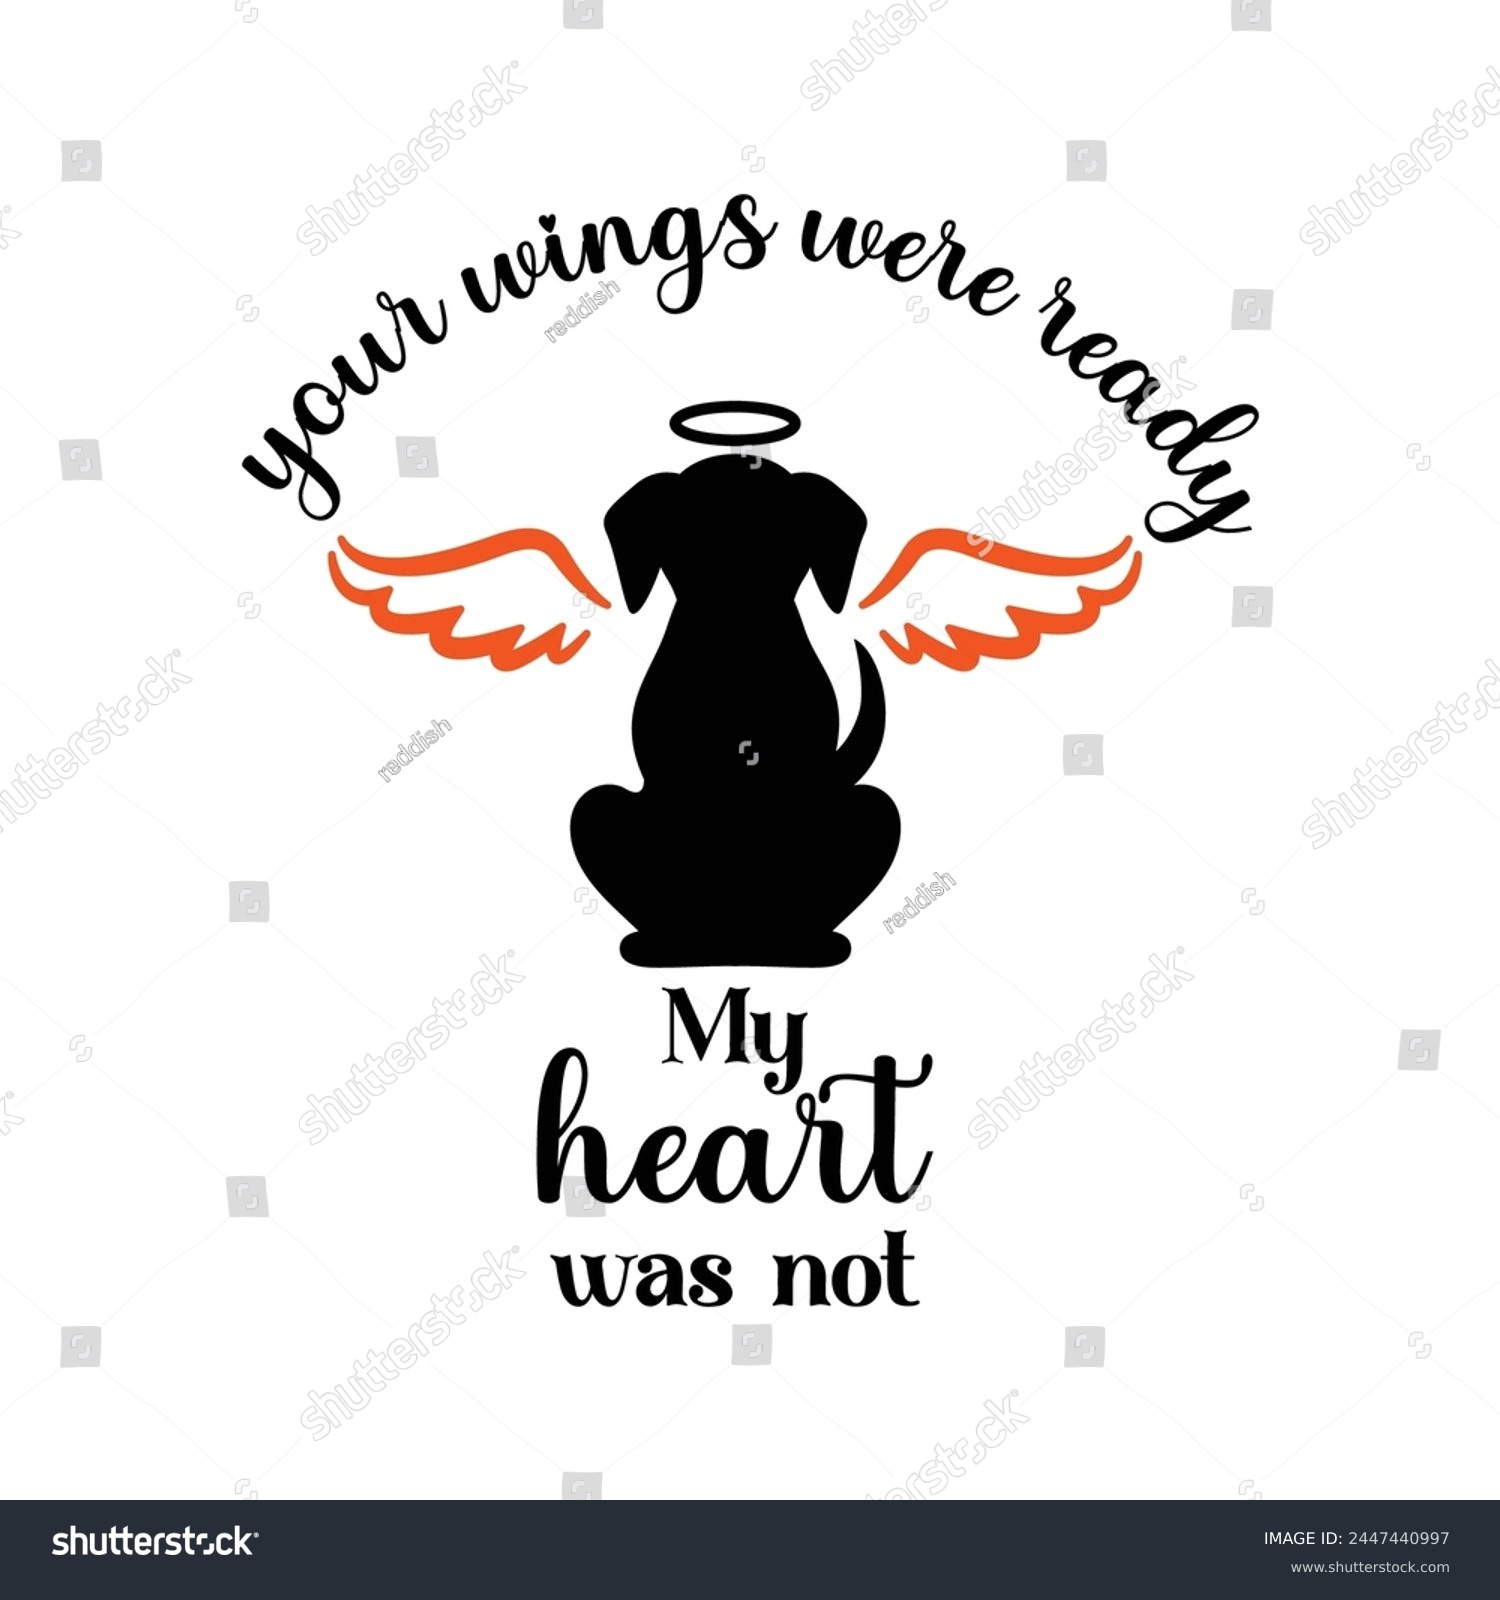 SVG of Dog memorial illustration, dow with wings, your wings were ready - my heart was not  svg